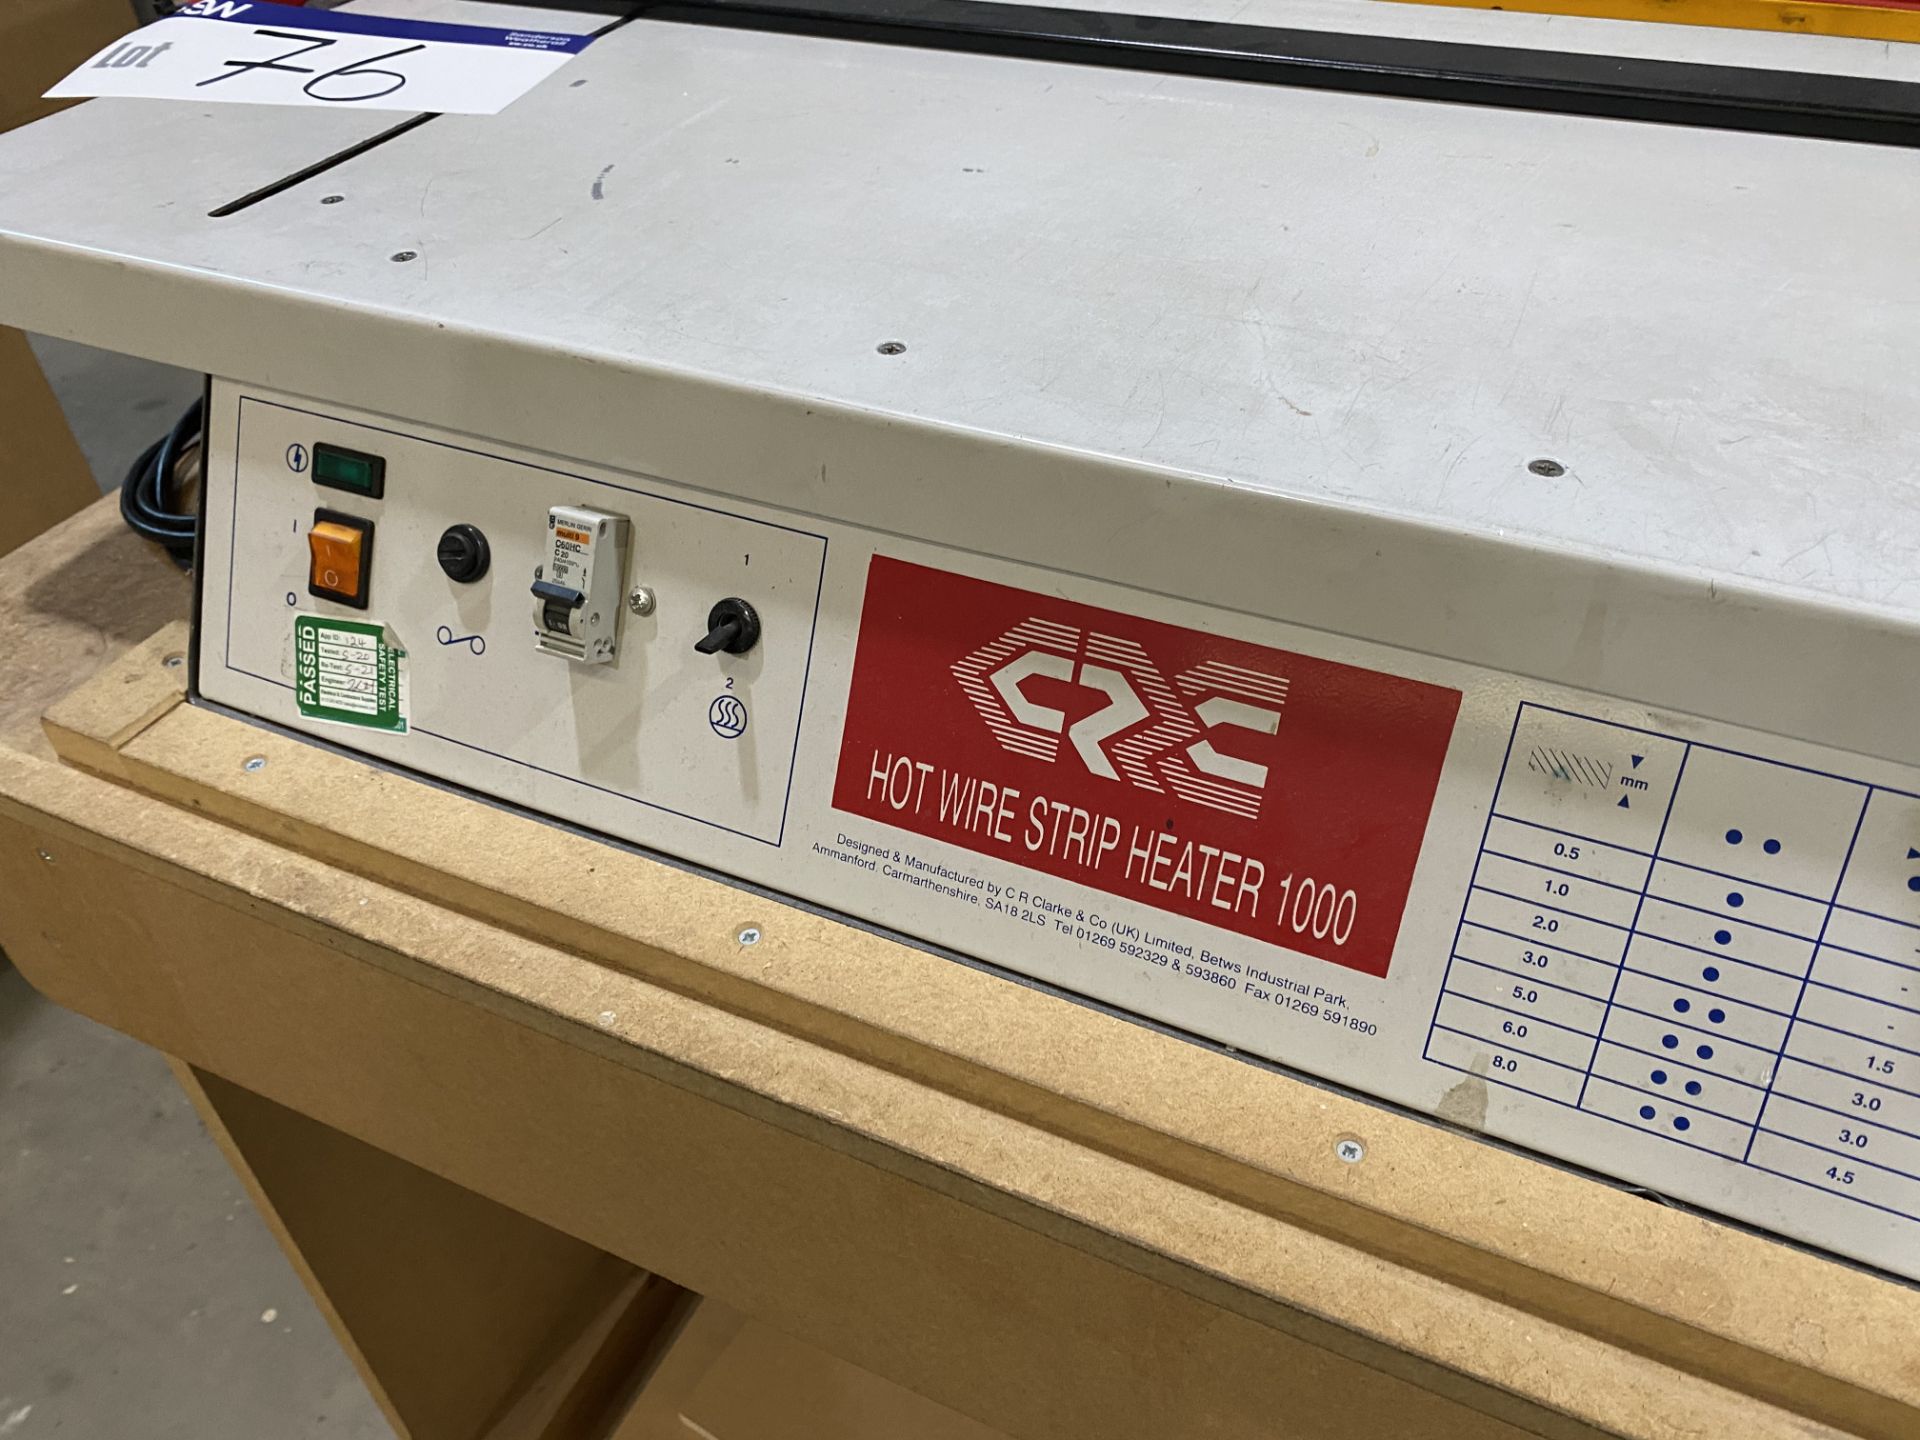 CRC 1000 Hot Wire Strip Heater - Image 3 of 3